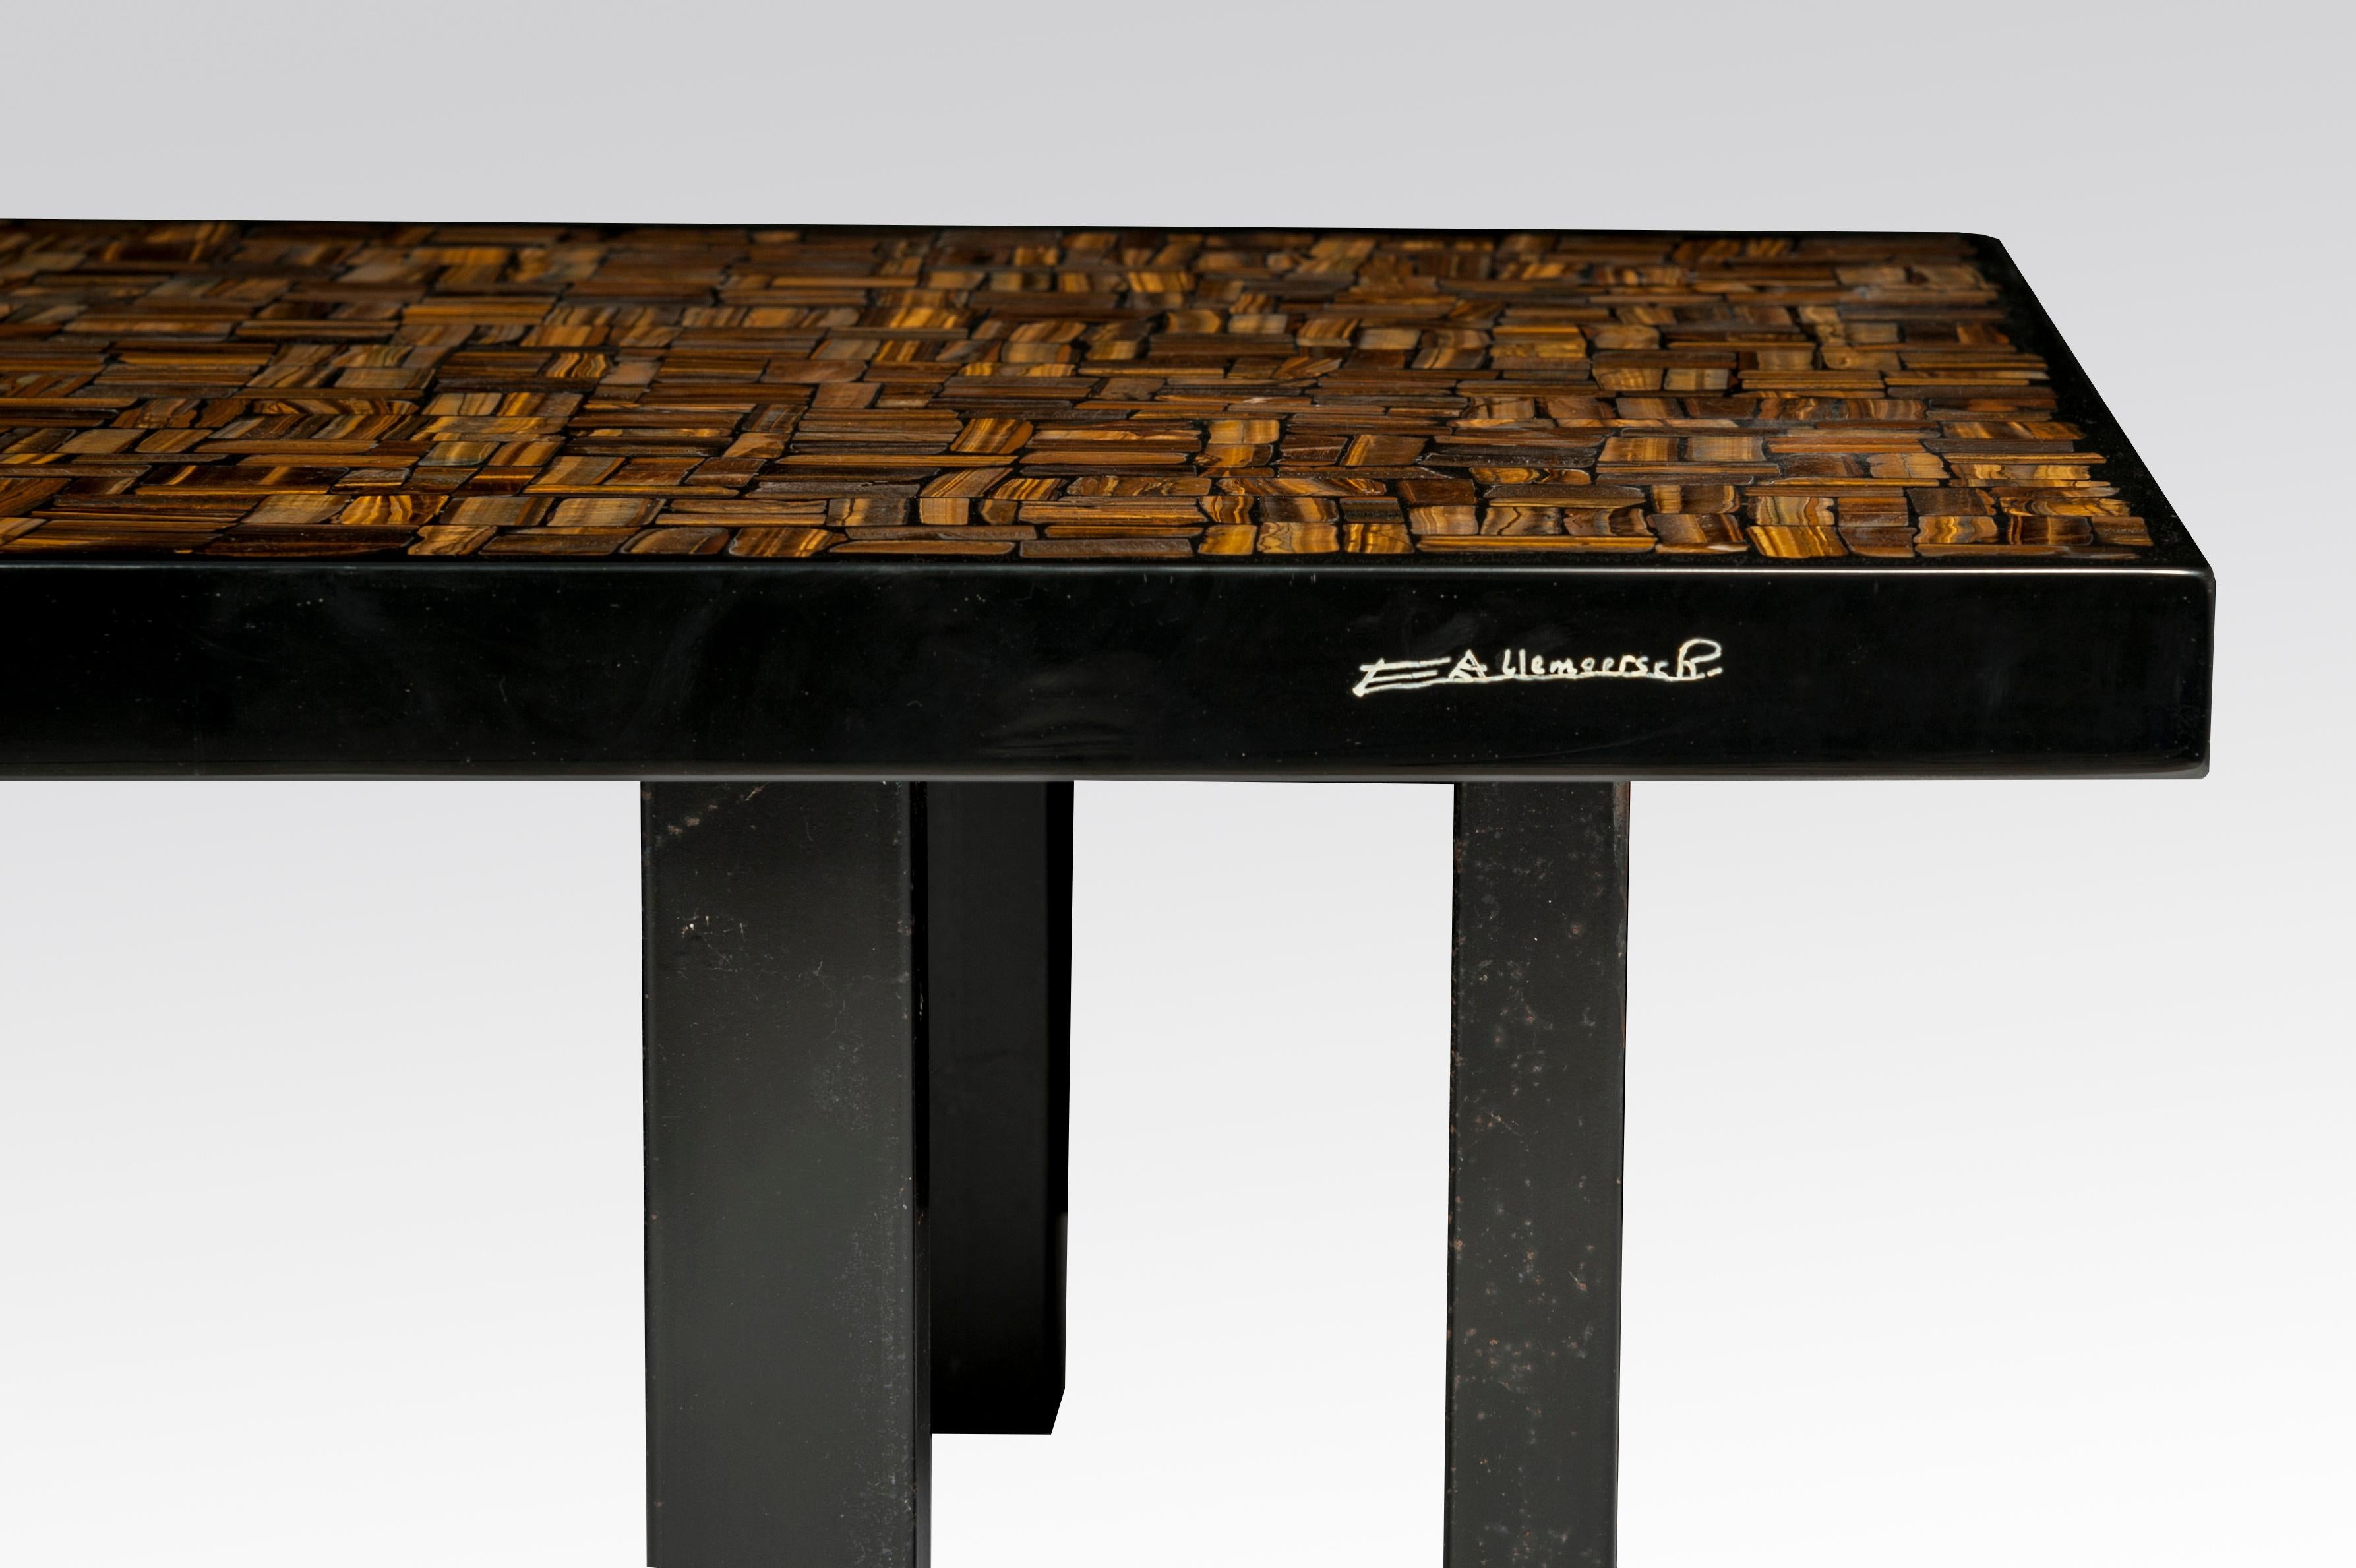 This coffee table by Etienne Allemeersch, an artisan who worked in the workshop of Ado Chale, is executed rectangular coffee table in resin with an inlay of tiger eye wood. The piece sits on a steel base and was produced in Belgium during the